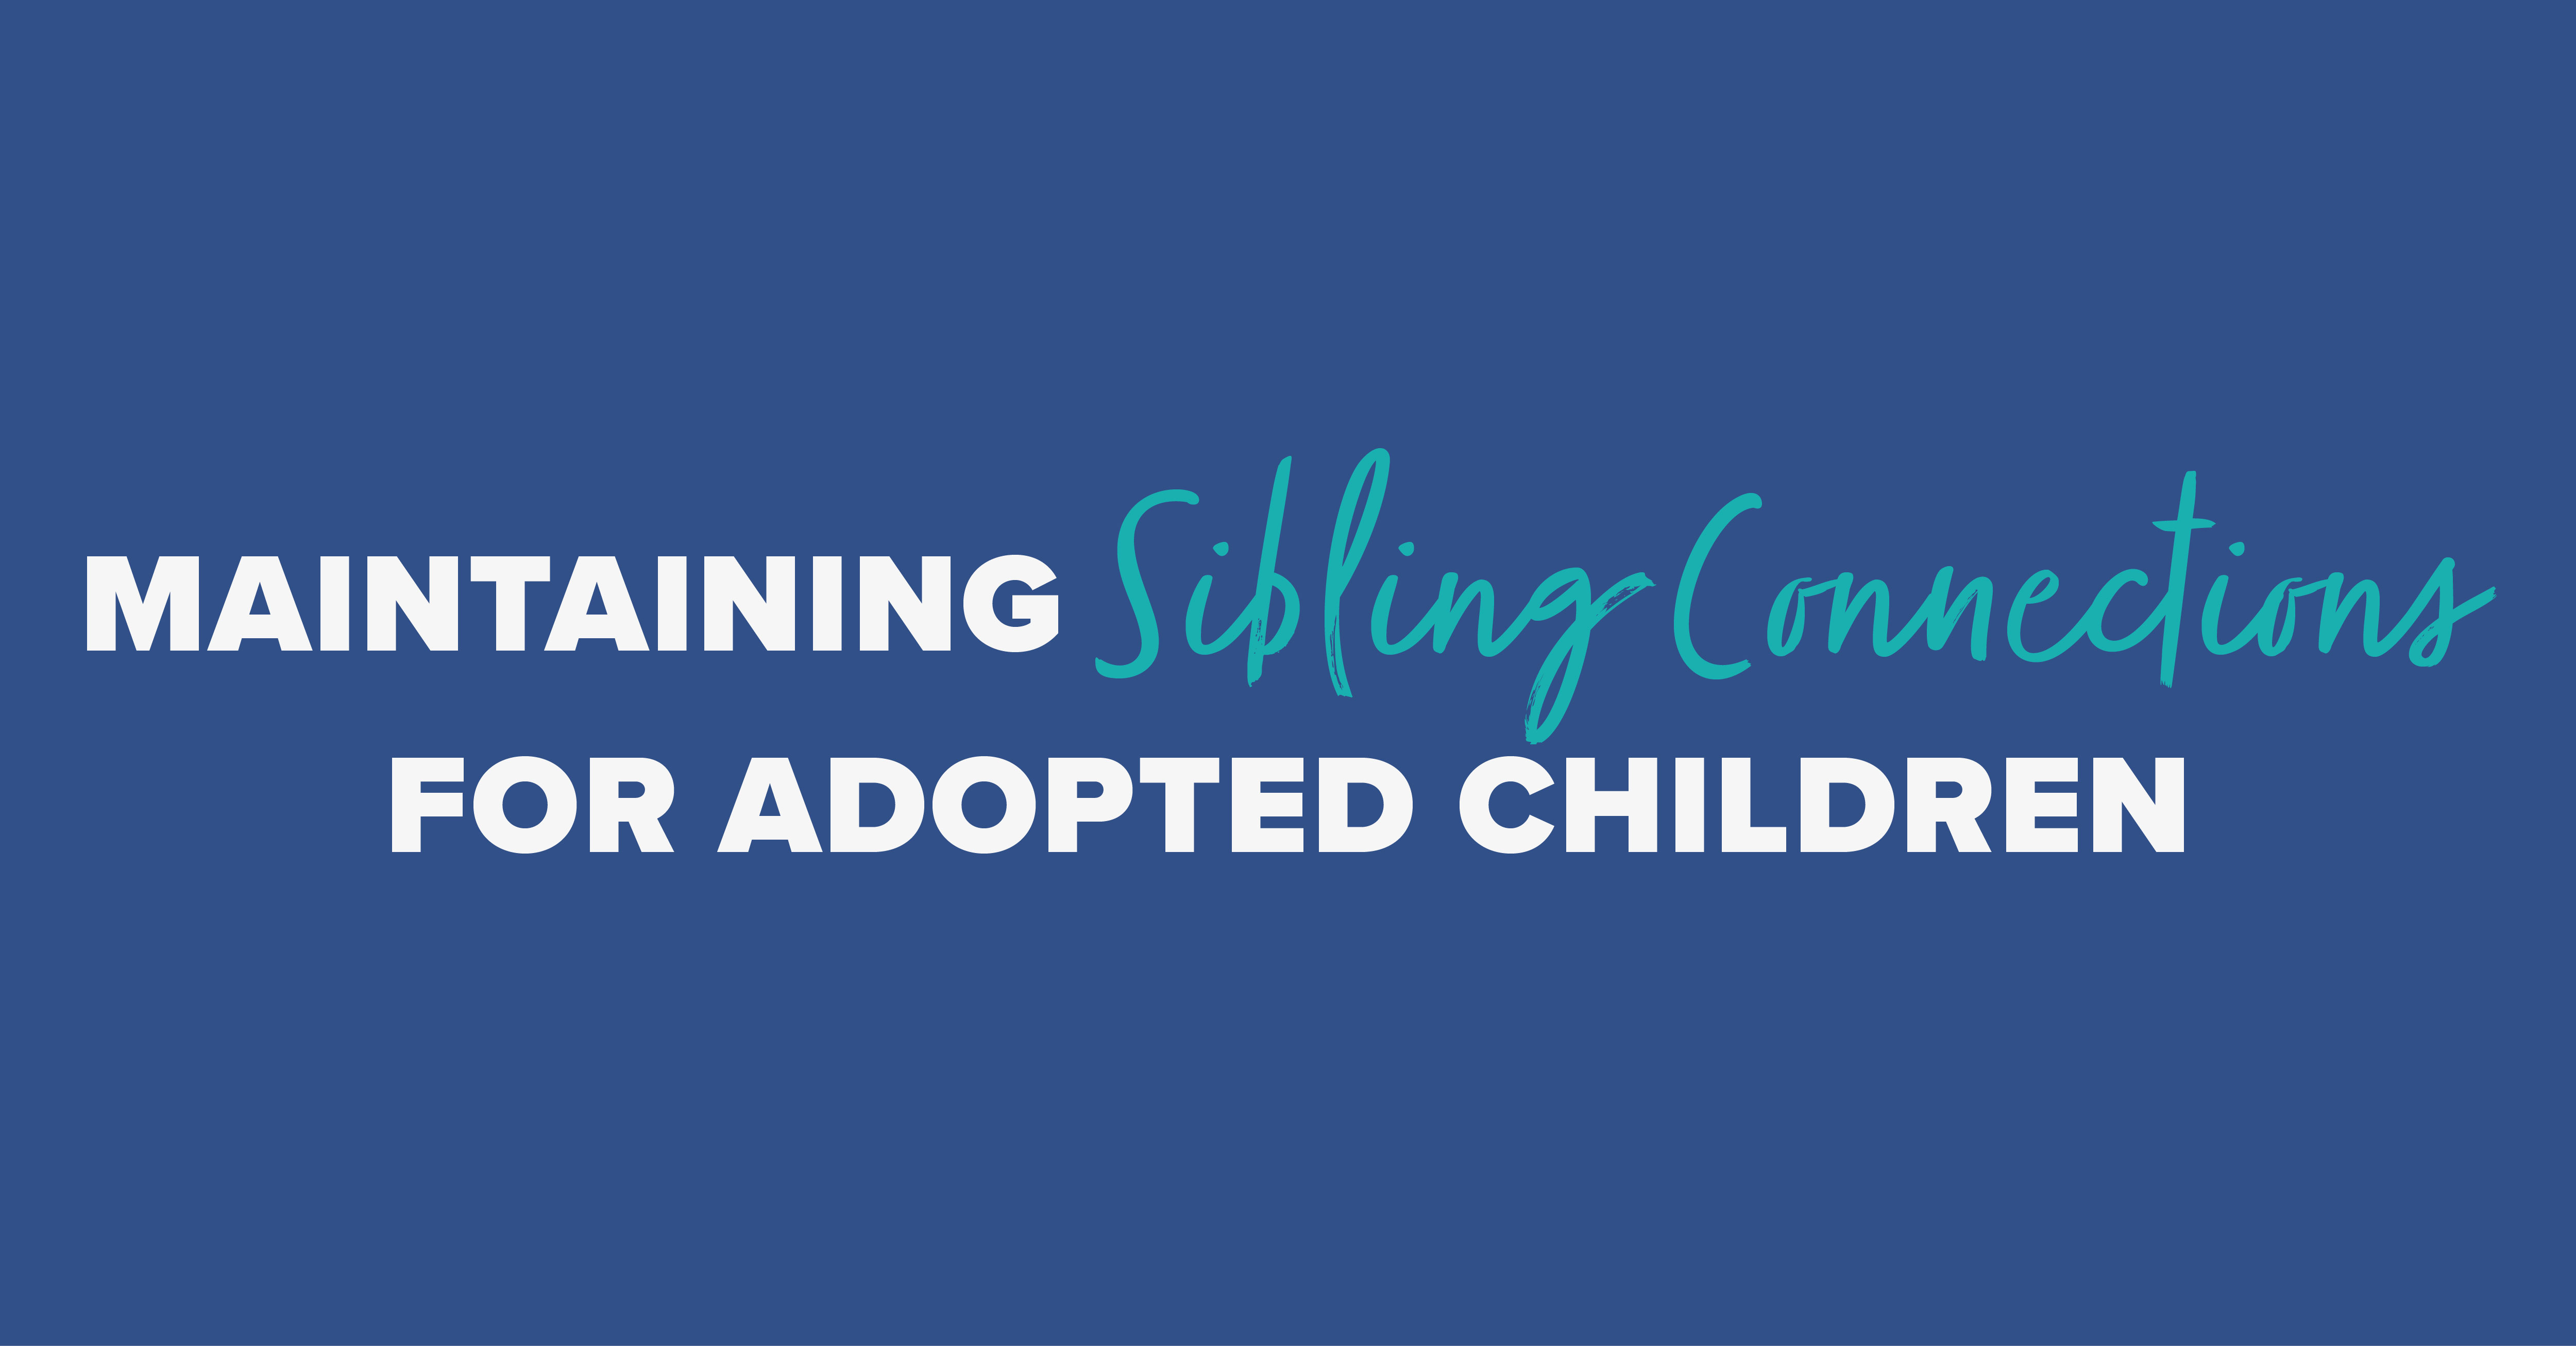 Maintaining Sibling Connections for Adopted Children